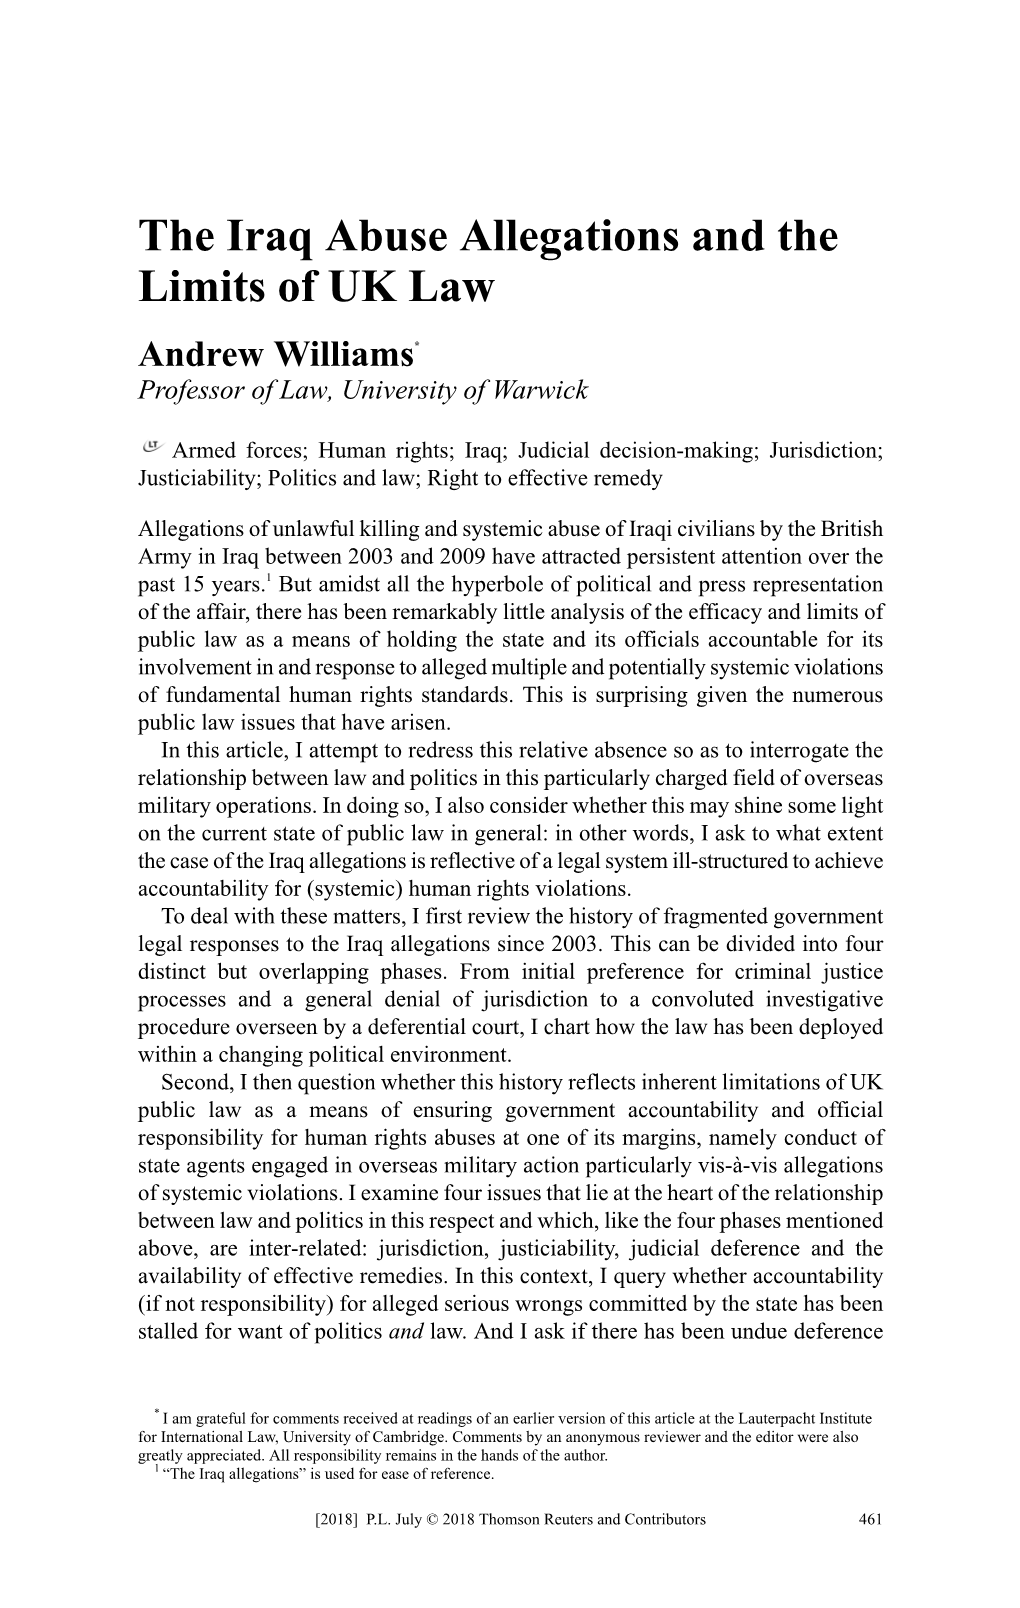 The Iraq Abuse Allegations and the Limits of UK Law Andrew Williams* Professor of Law, University of Warwick